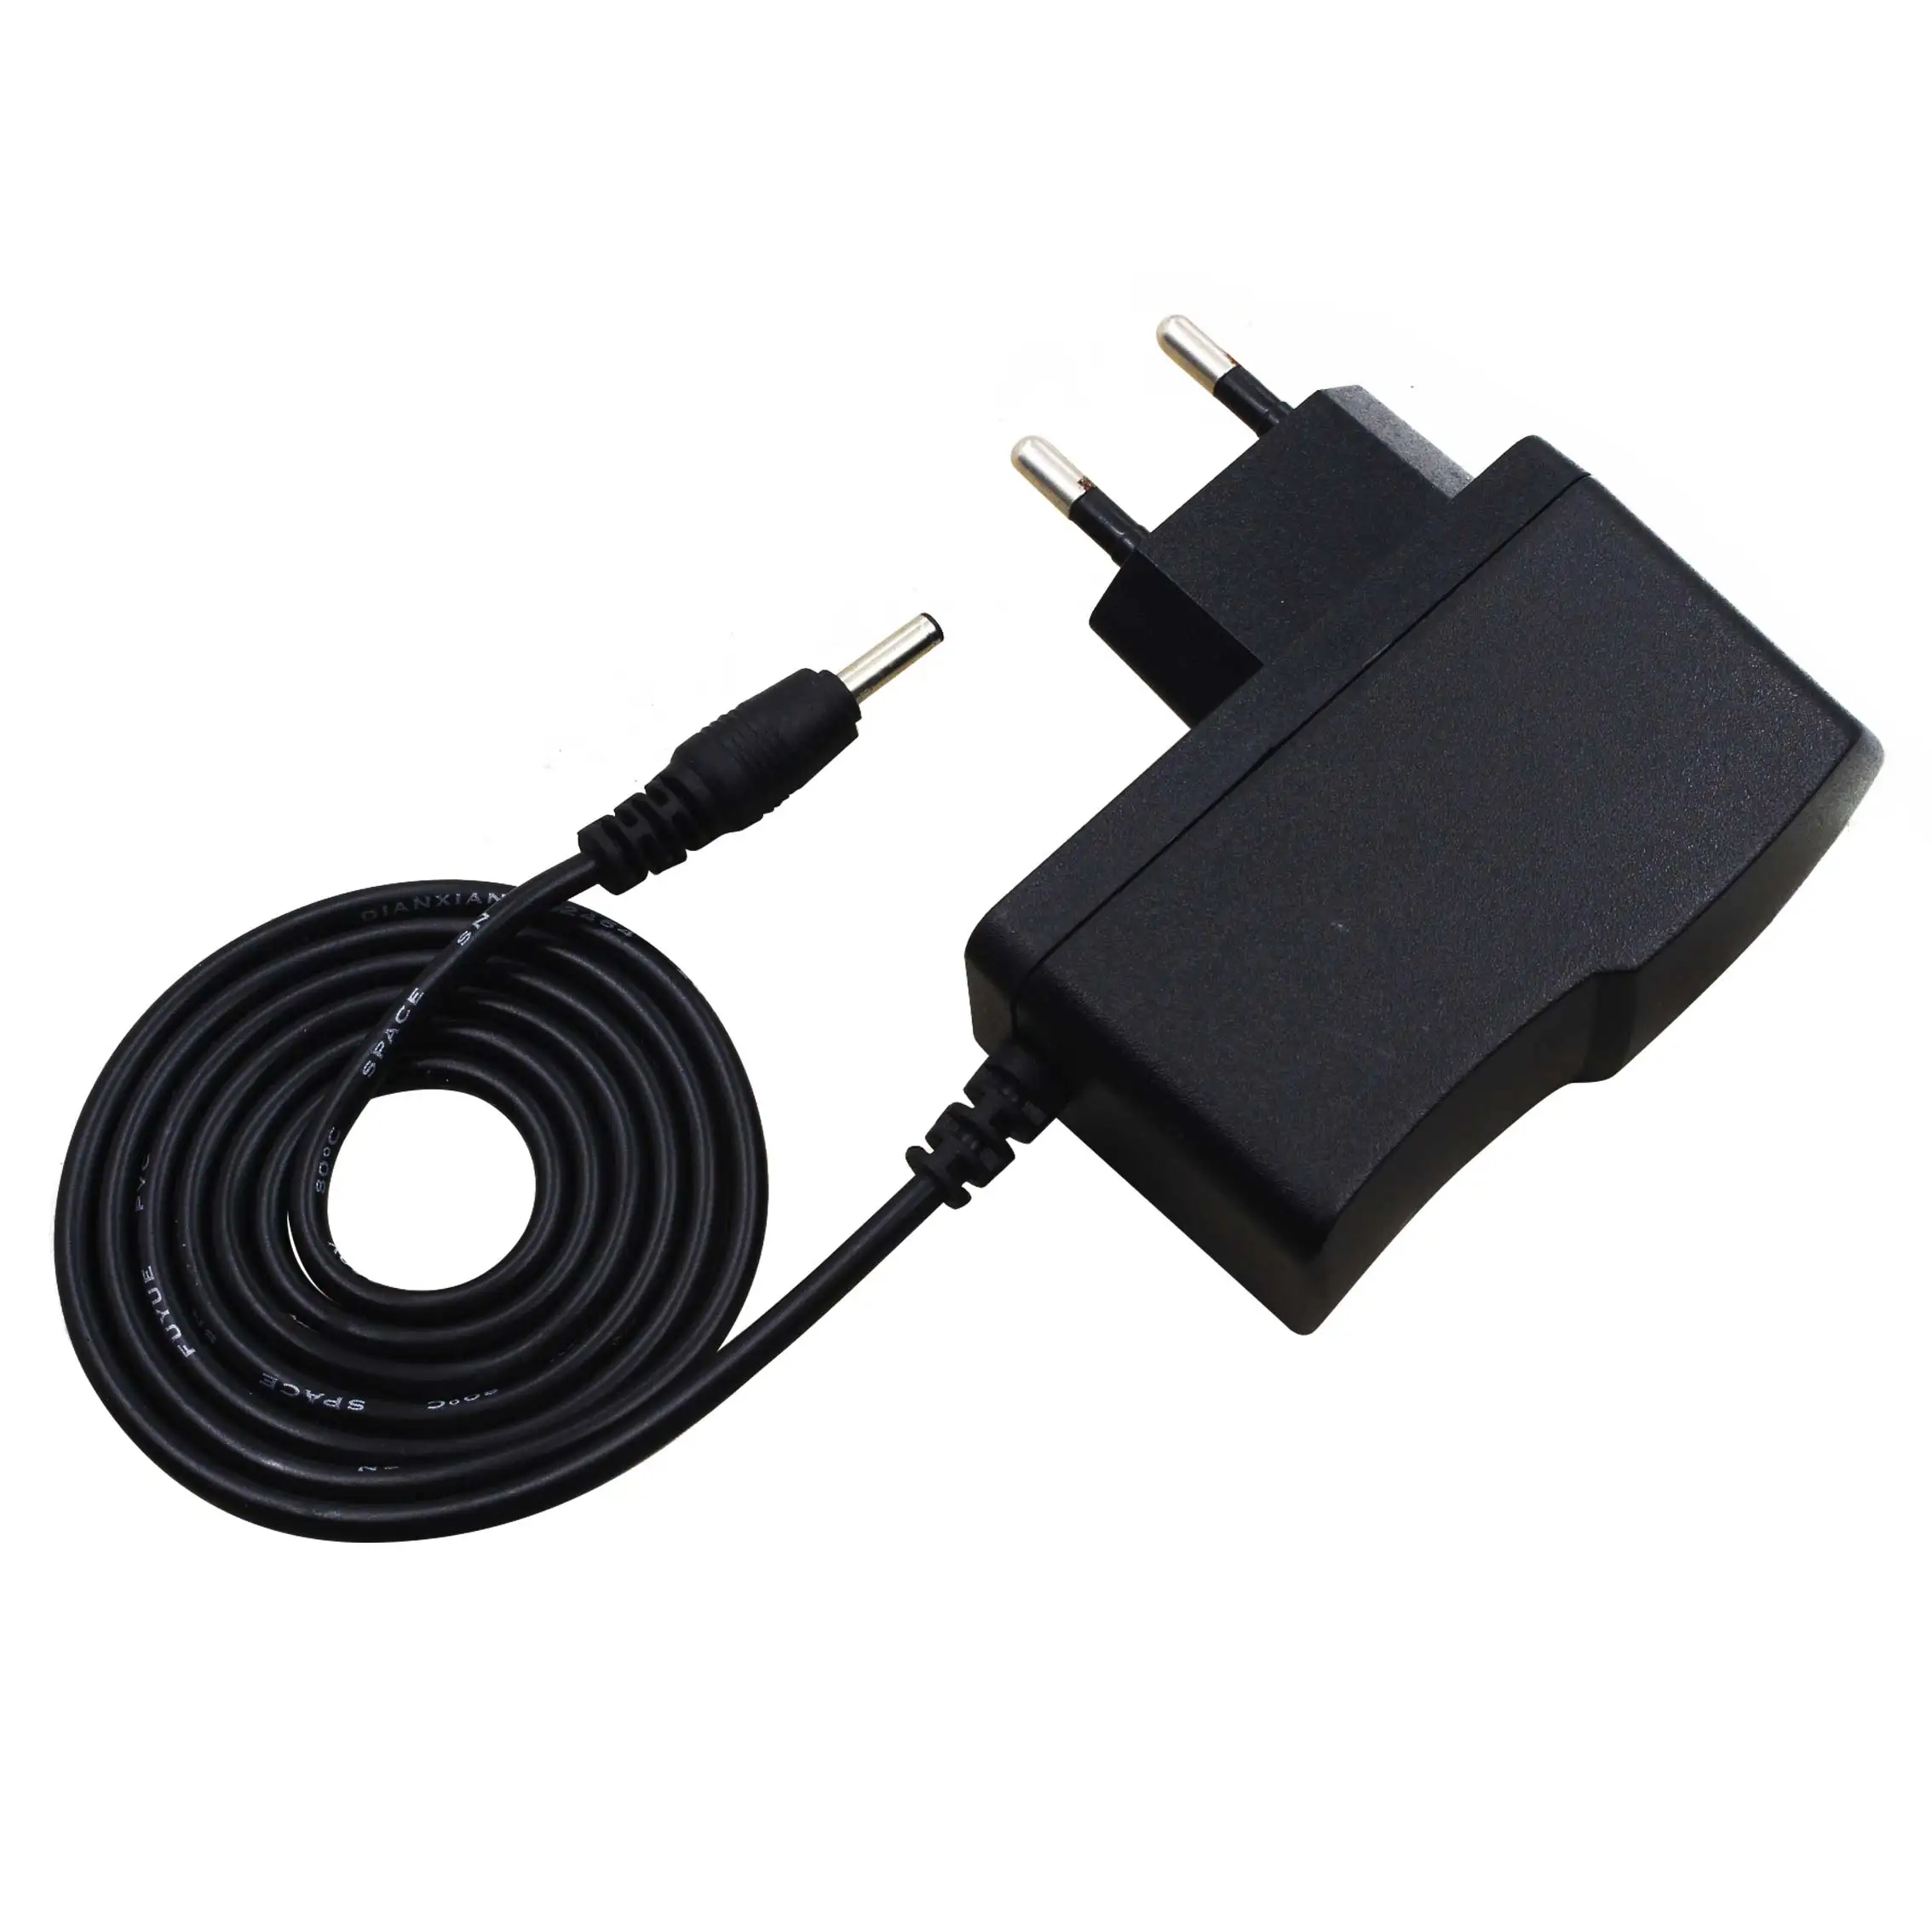 AC/DC 12V 1A 1000mA Switching Power Supply Cord adapter 3.5mm x 1.35mm 